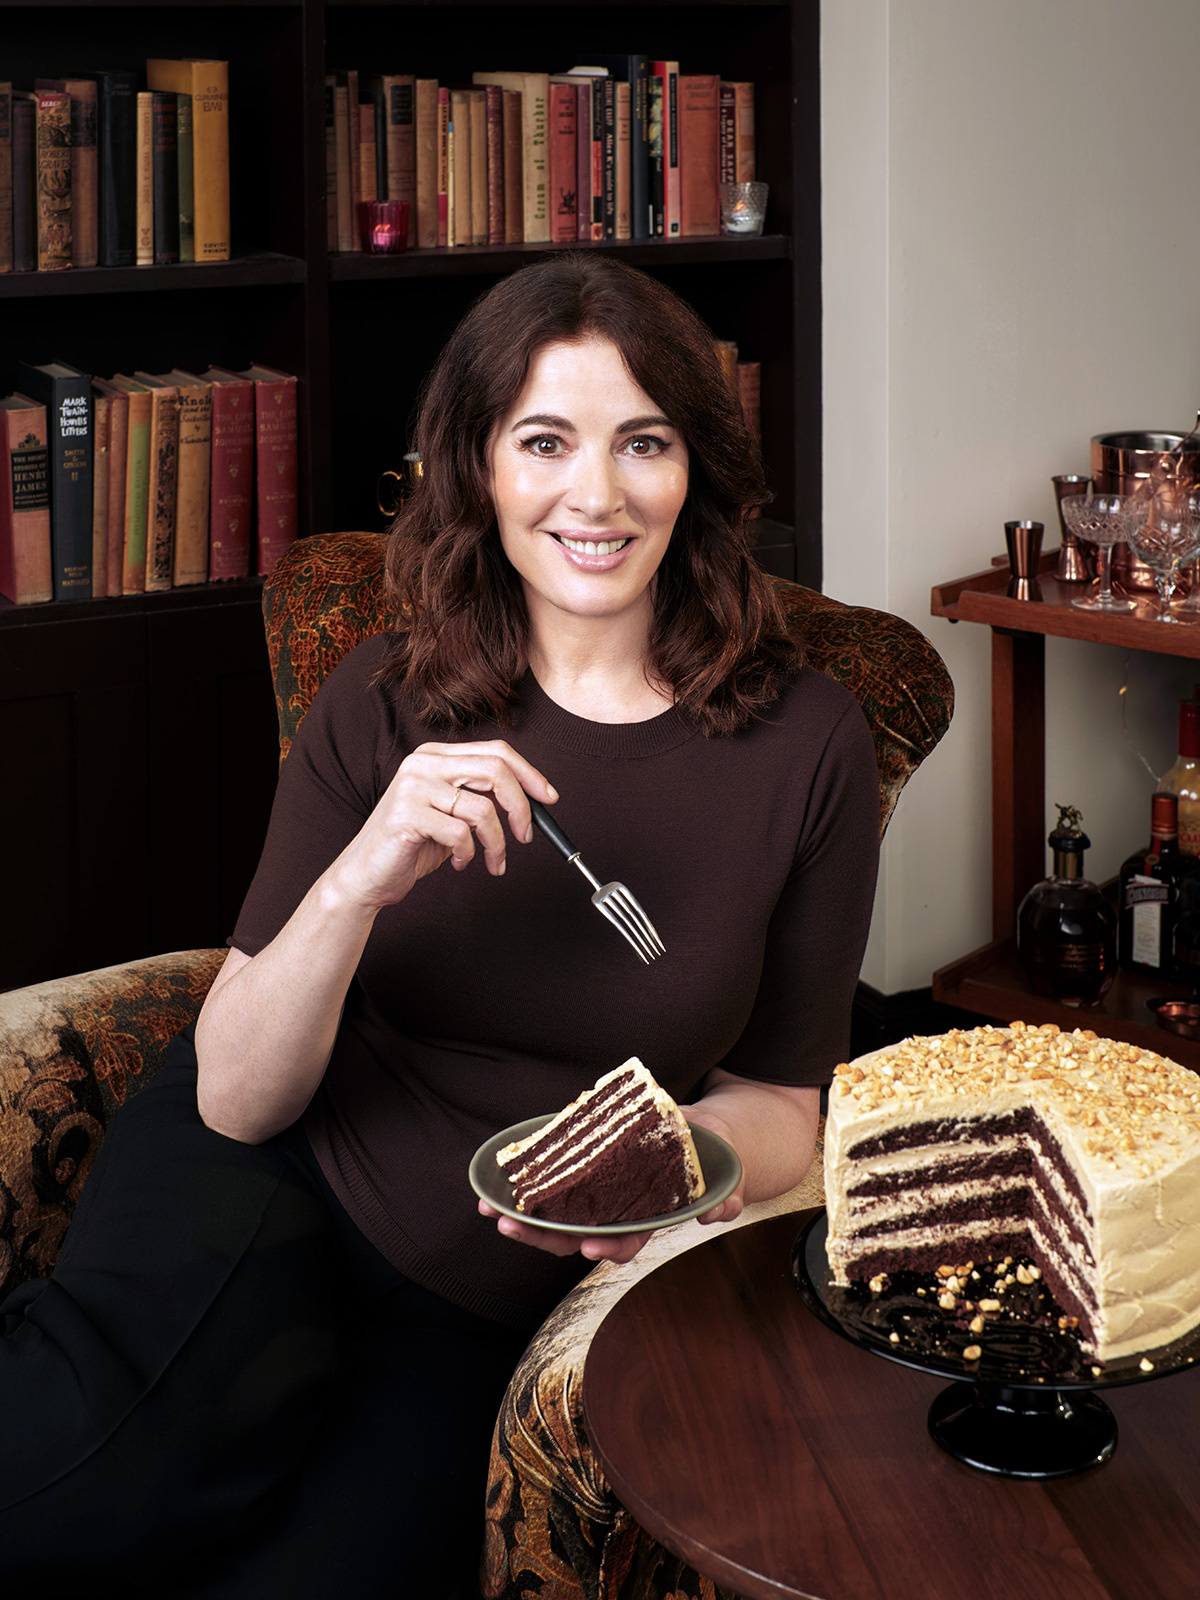 Image of Nigella with Chocolate Peanut Butter Cake